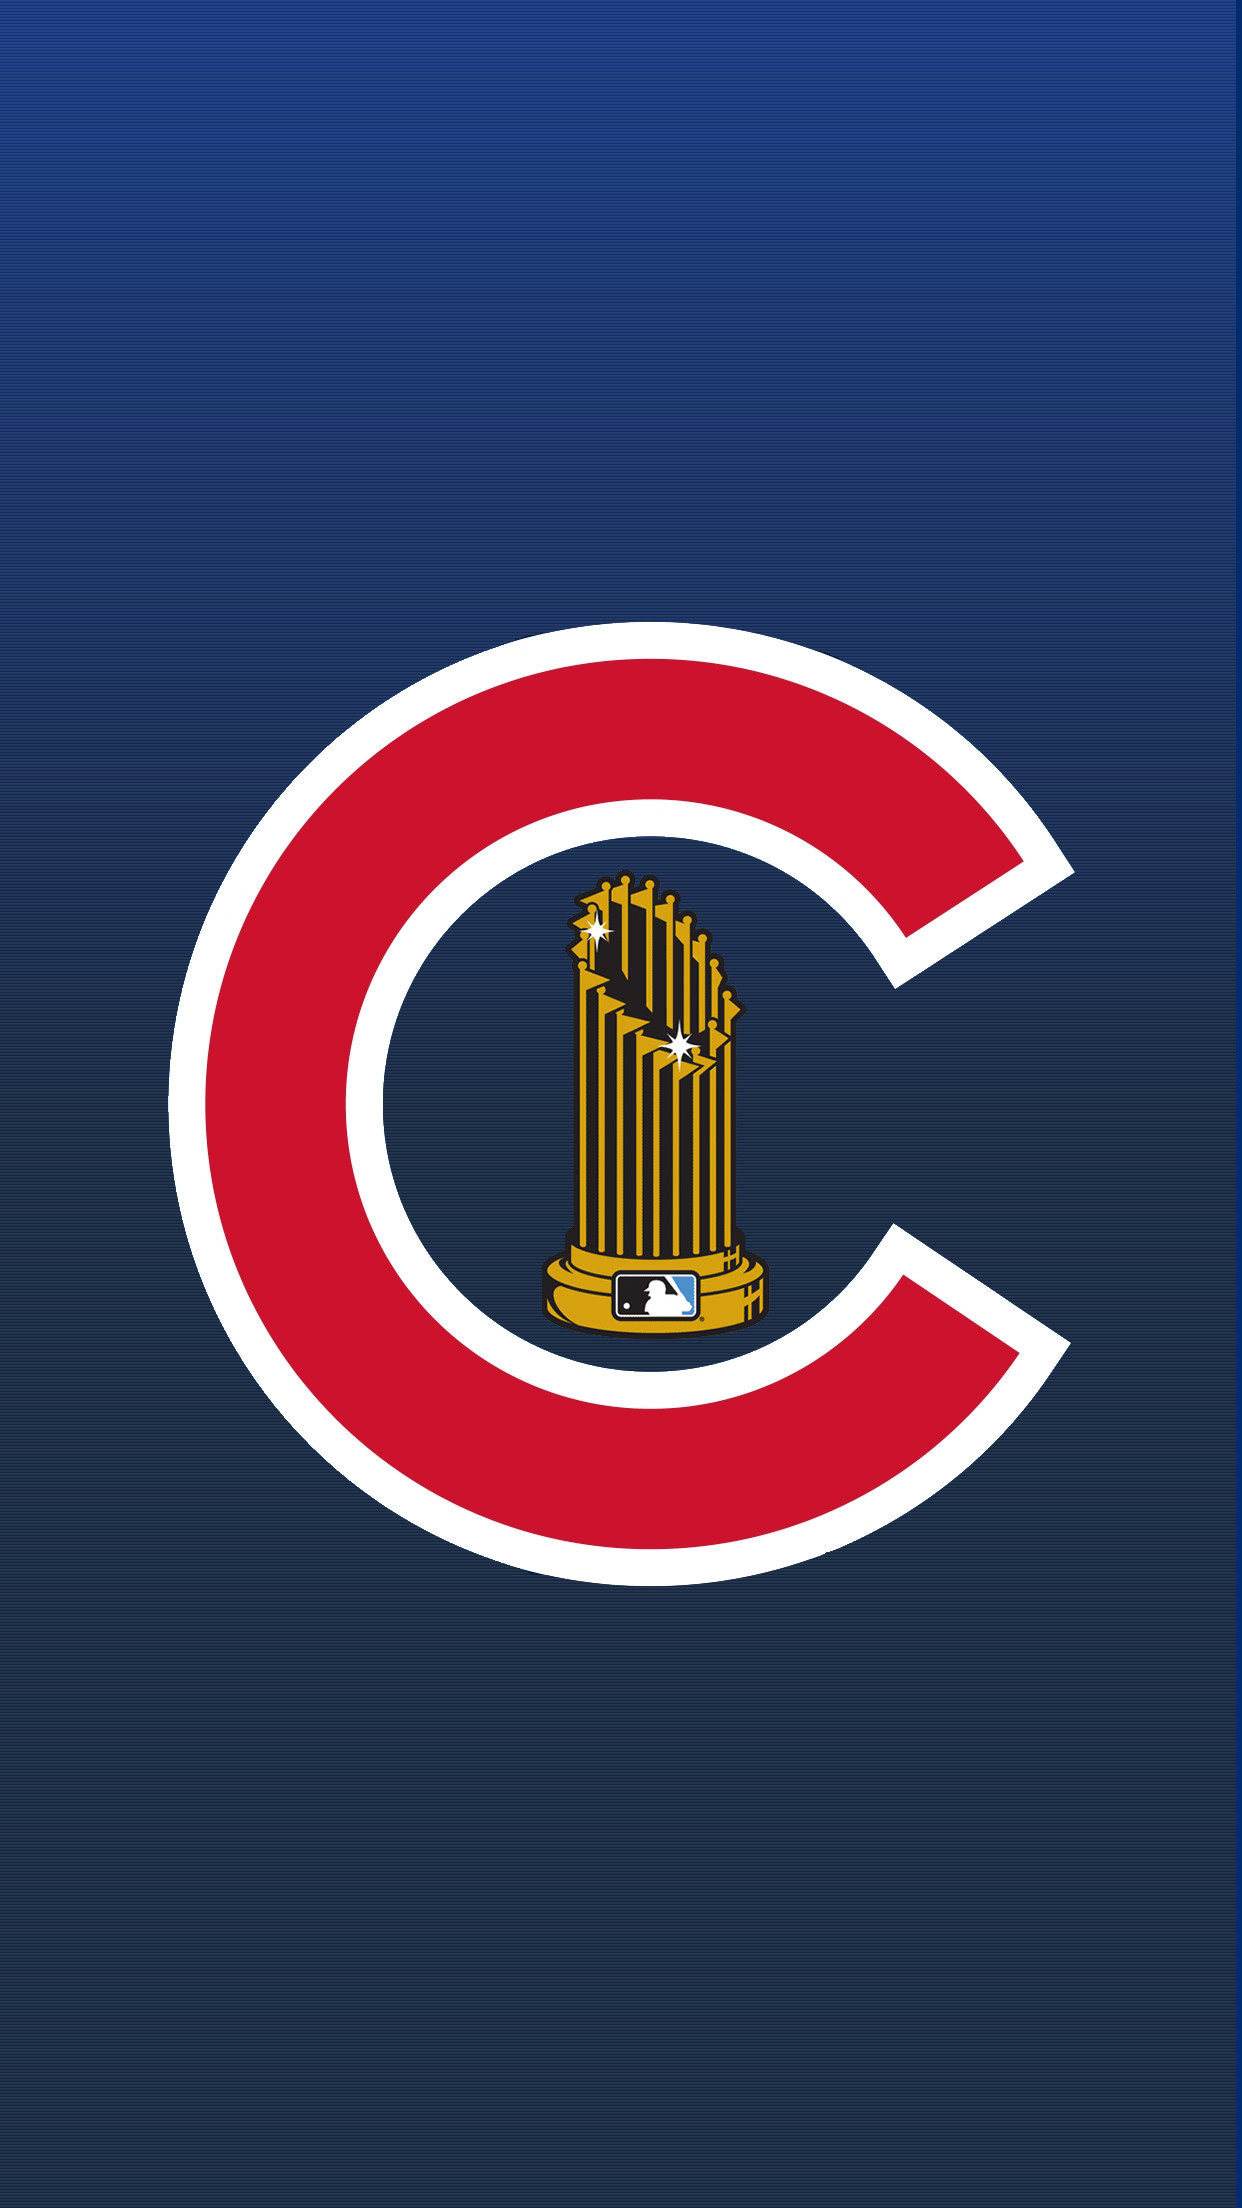 Someone asked for a iPhone Wallpaper of the "C" and trophy.